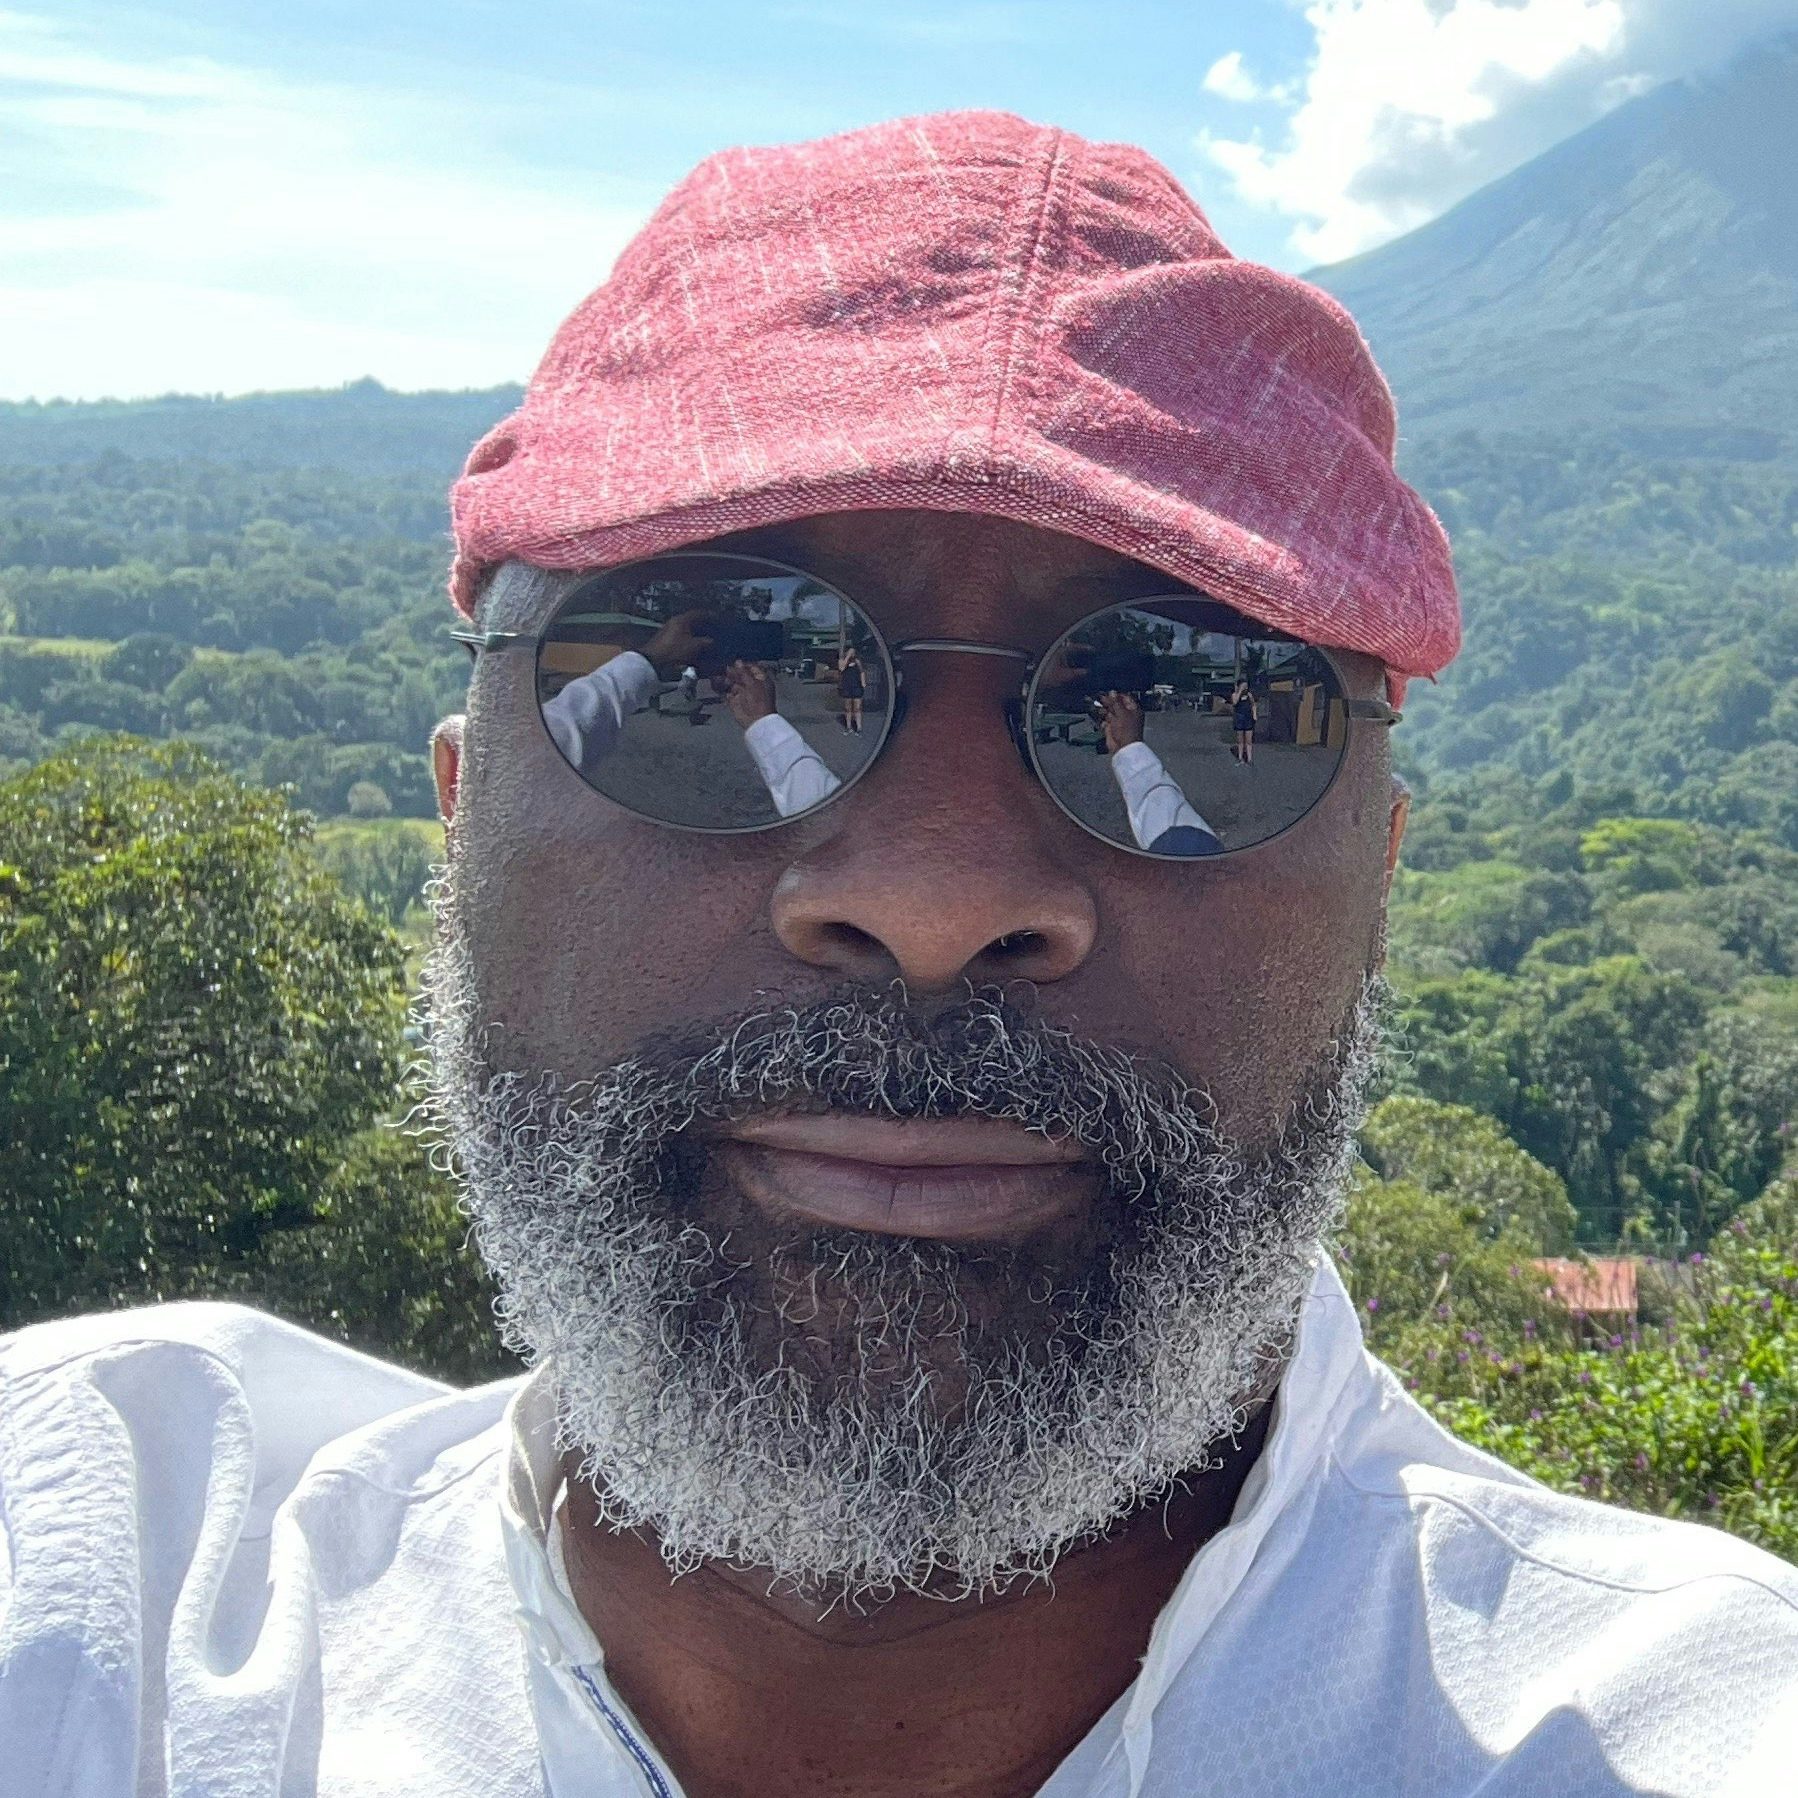 Travel Advisor Michel Sedrick Desir in a white shirt and red hat standing in front of green trees.